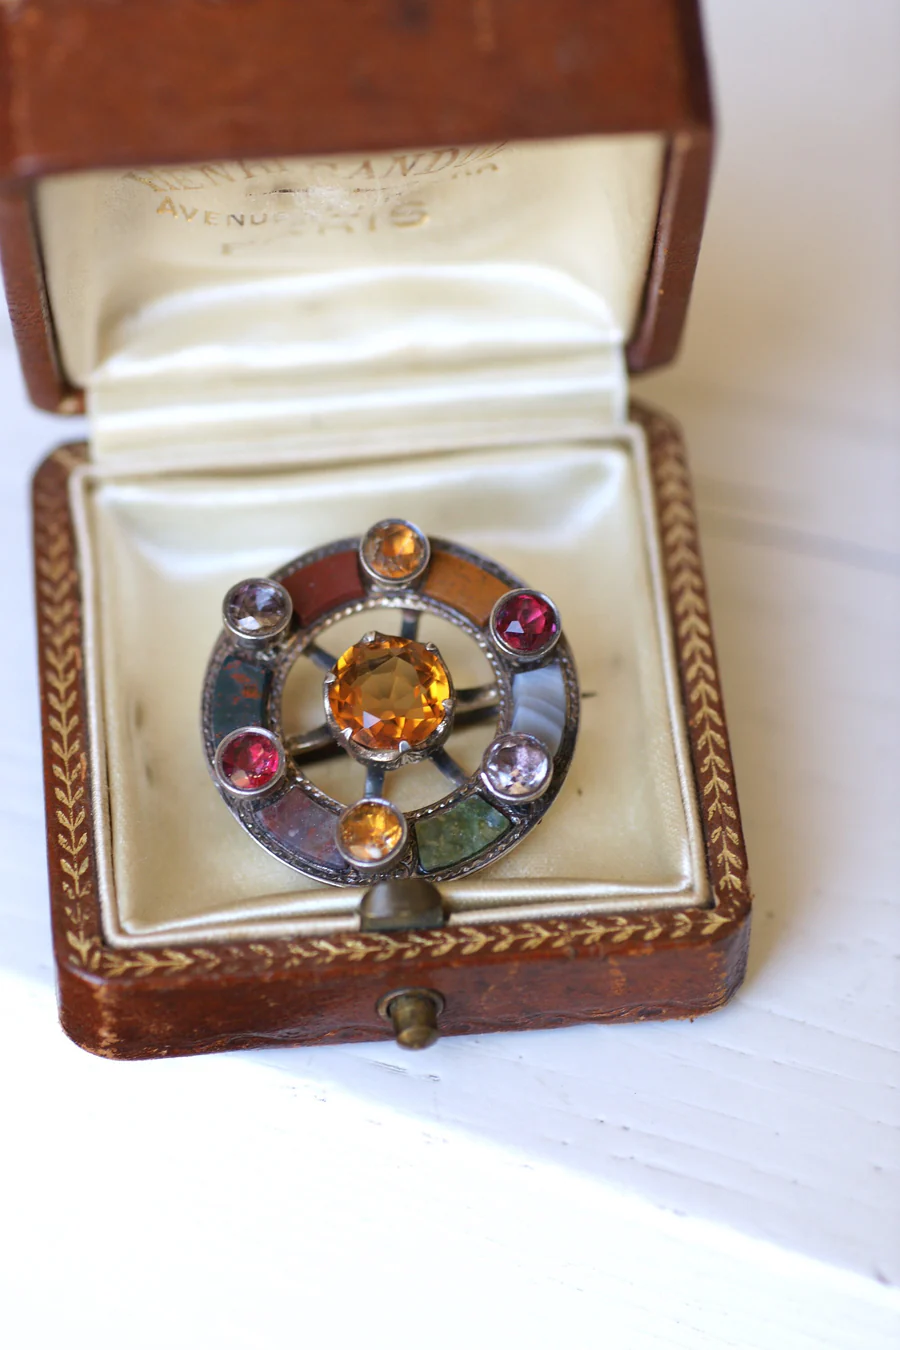 Antique Scottish thistle brooch in gold, amethyst, jasper and agate